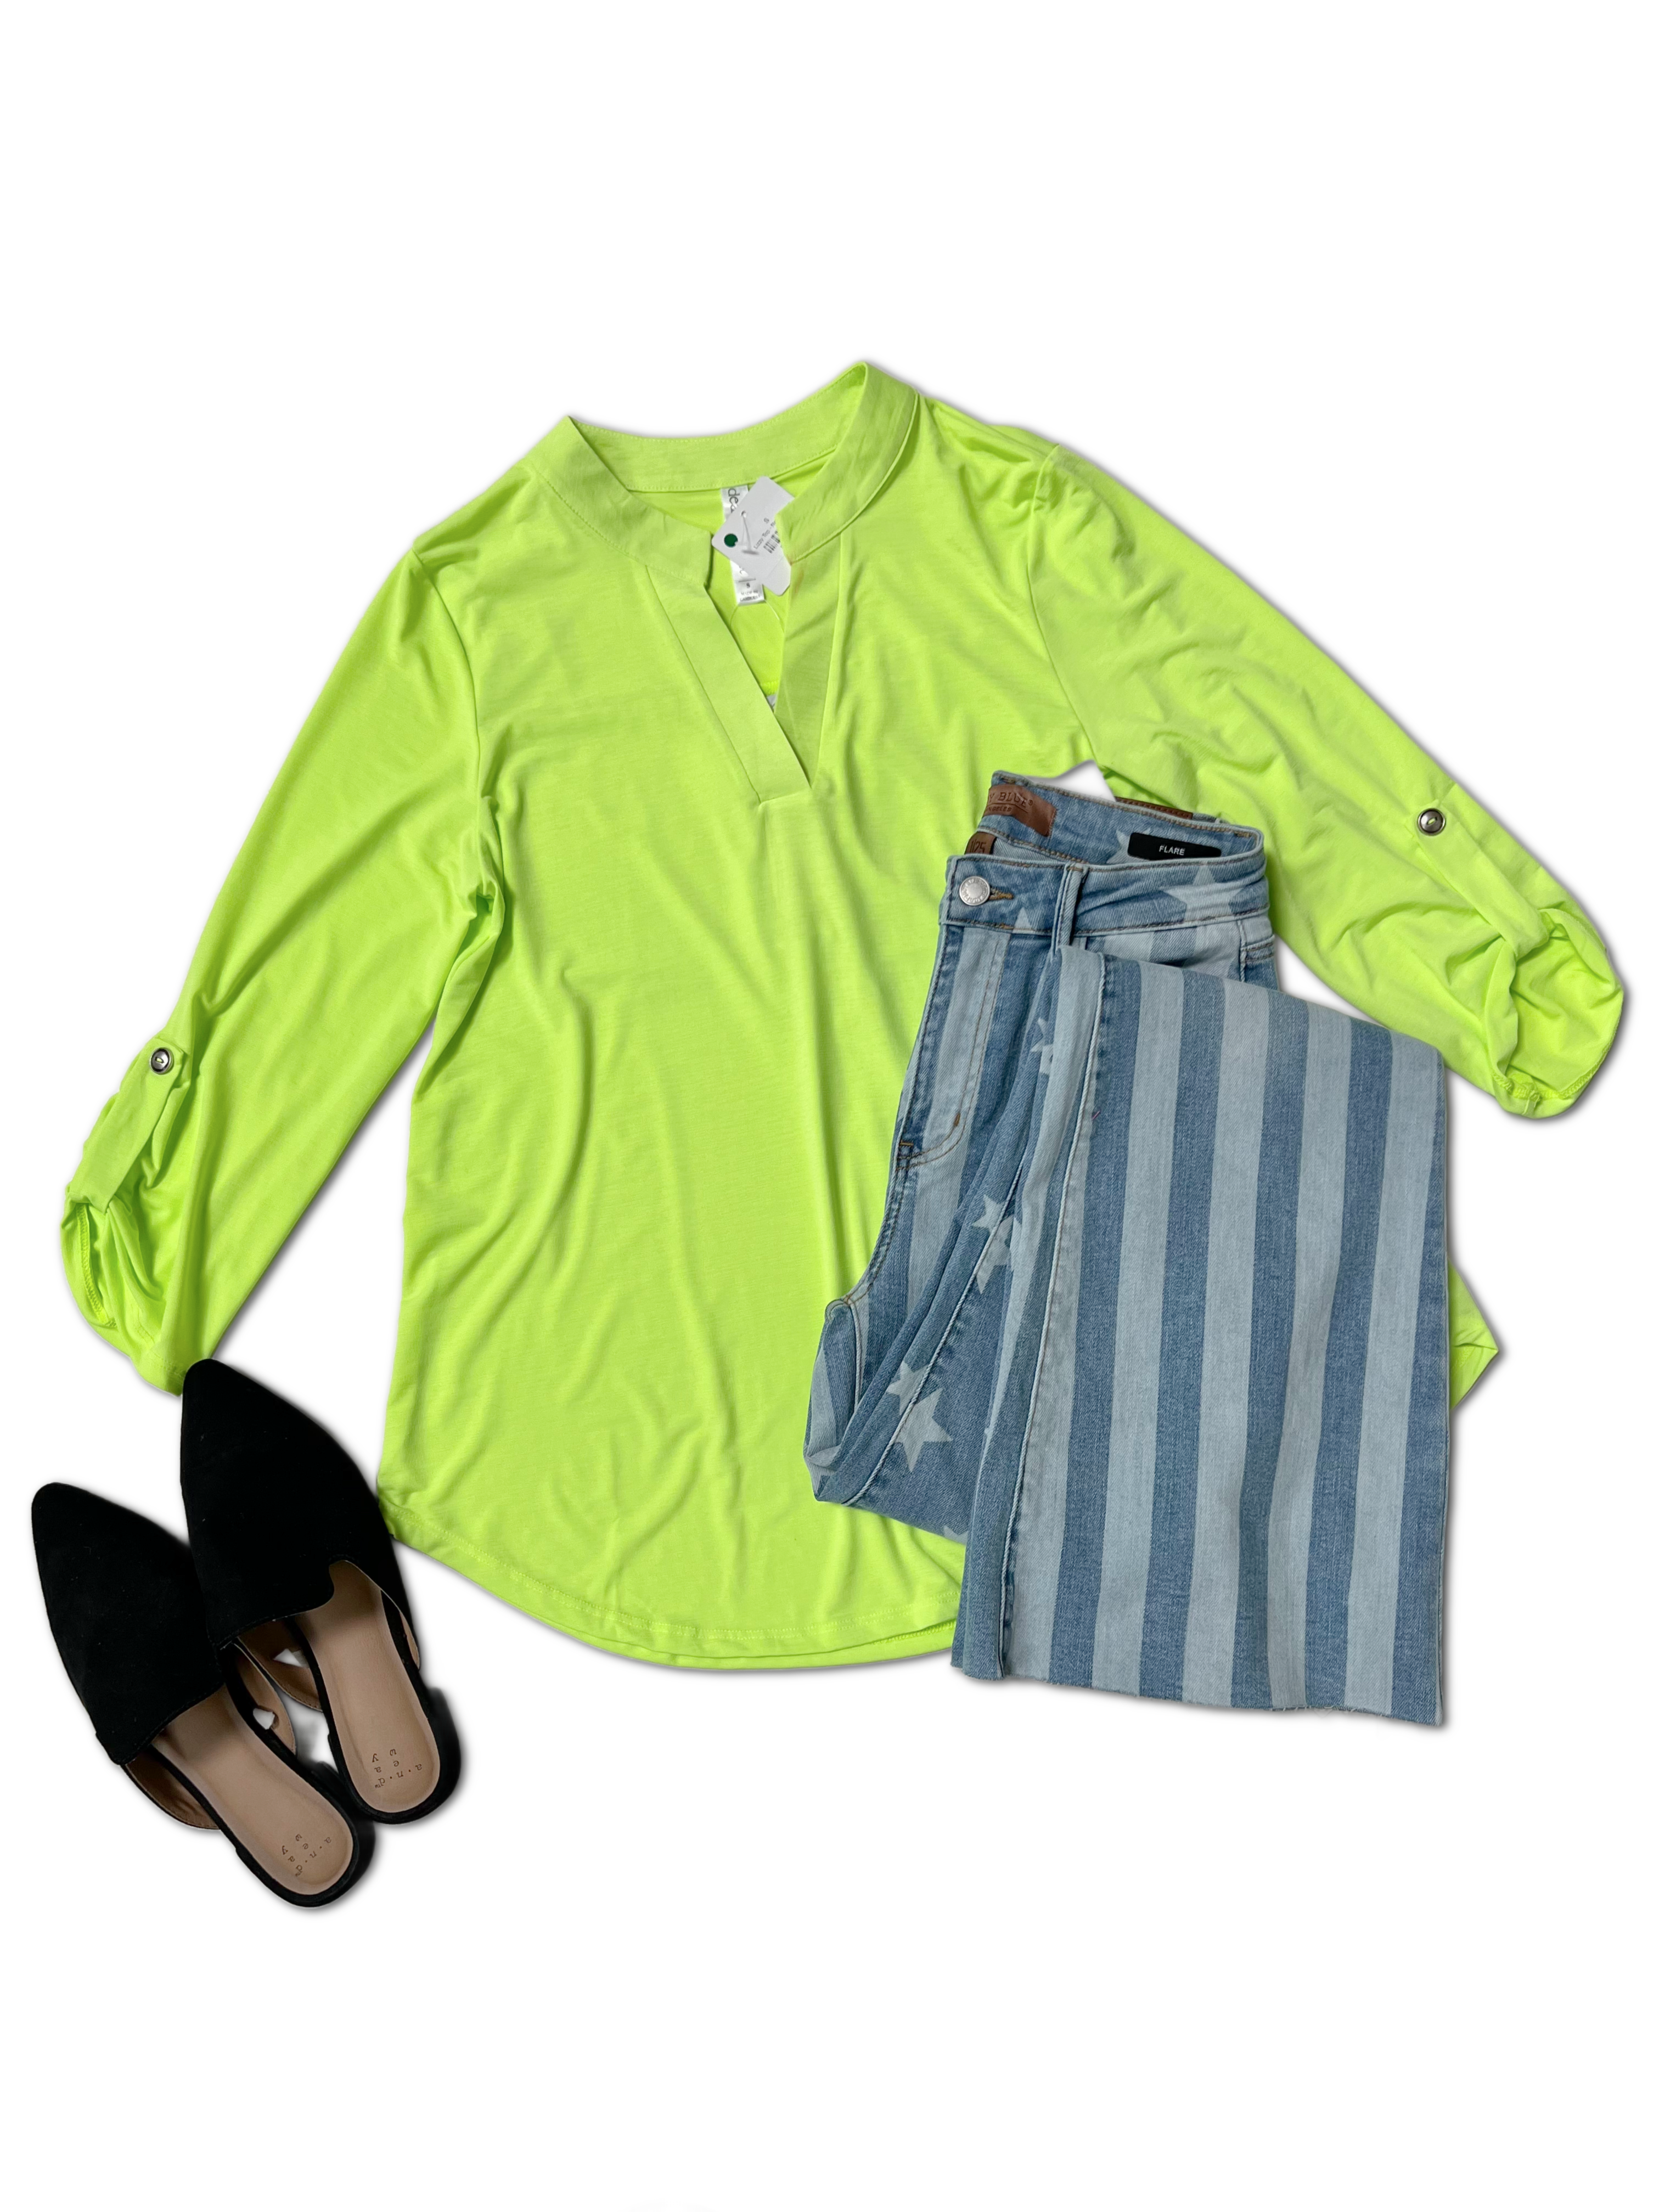 Lizzy Top - Neon Green